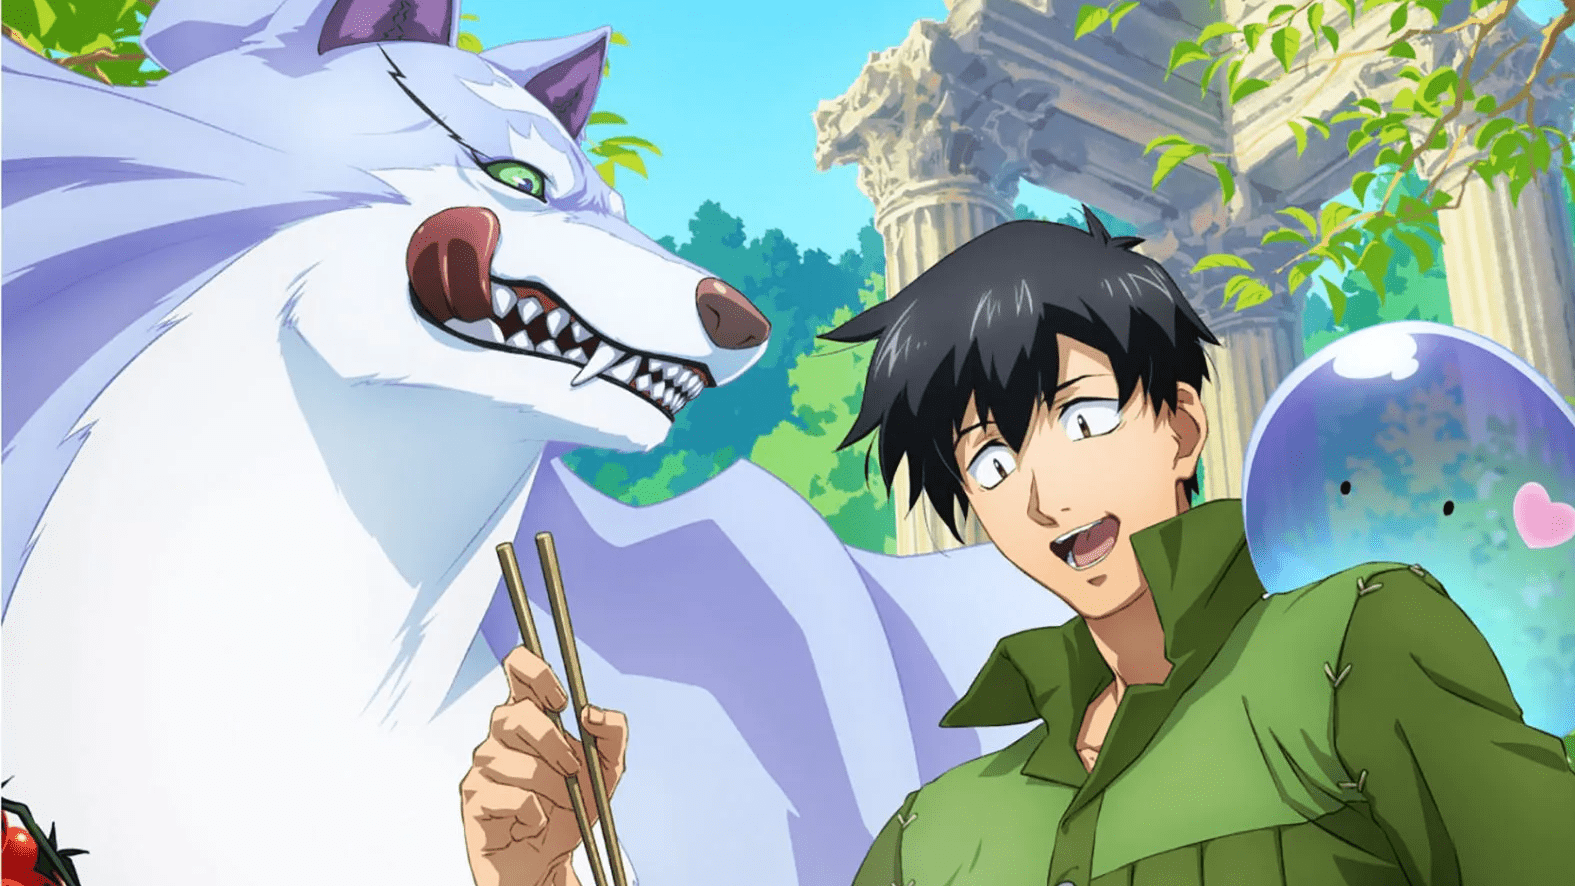 This season's fantasy anime abounds with useful skills that don't require magic!